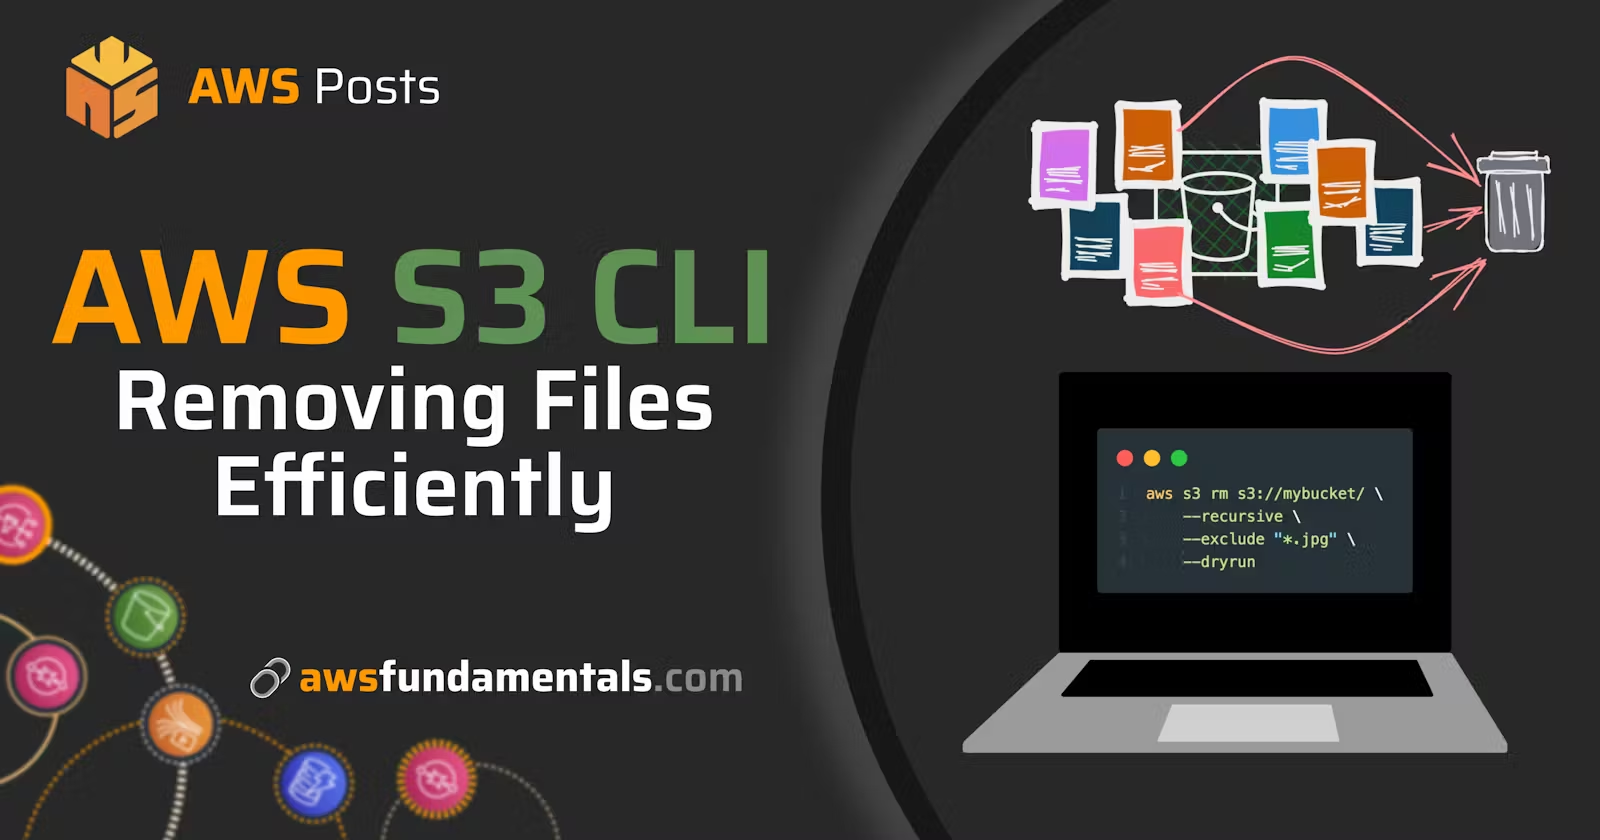 AWS S3 CLI for removing files efficiently.